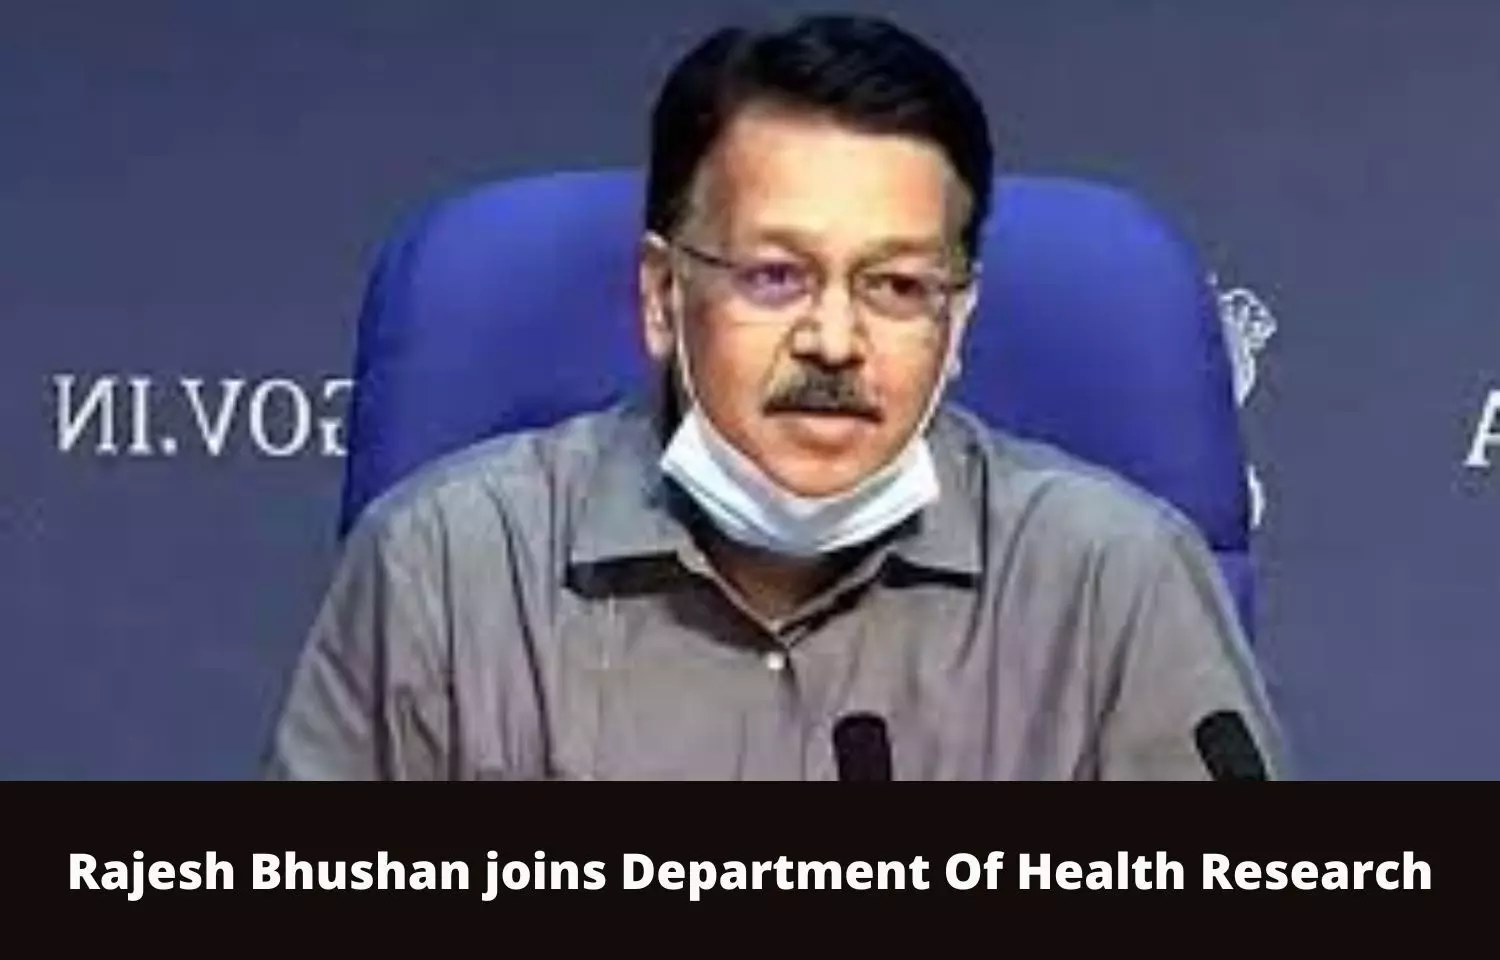 Union health secretary Rajesh Bhushan gets additional charge of Secretary, Department of Health Research